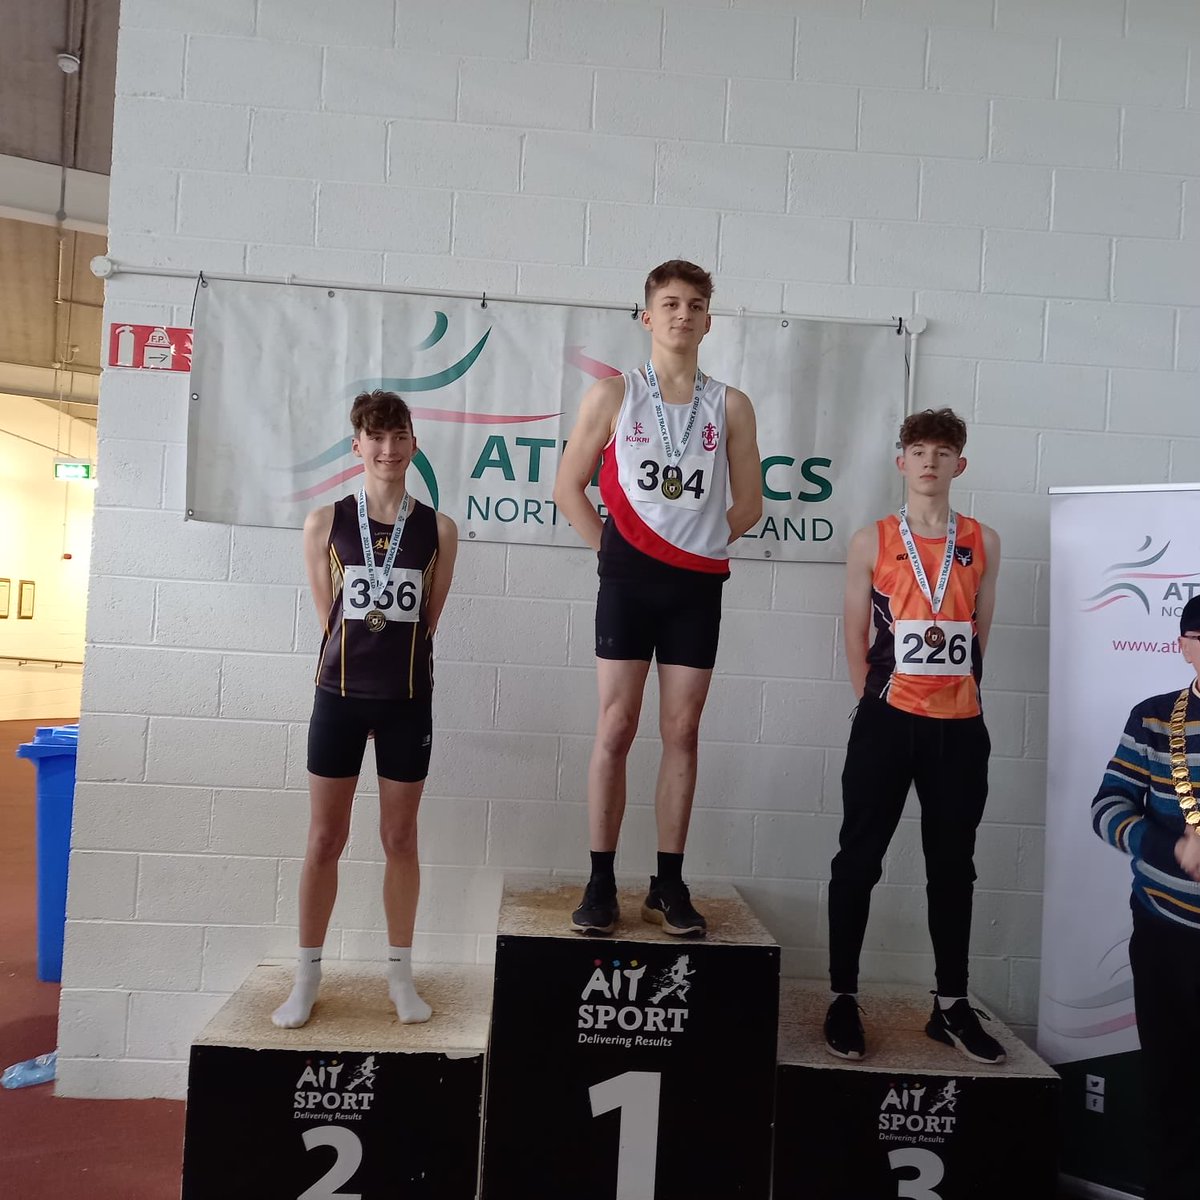 PB’s for all the junior sprinters and 4 medals at the NI&Ulster Championships yesterday. Ben Sykes U16 60m Gold. Ewan Donald U15 60m Bronze. Rory Hobbs 60m & 200m Bronze. Fantastic running from everyone. 💥💥 ⁦@OrangegroveAC⁩